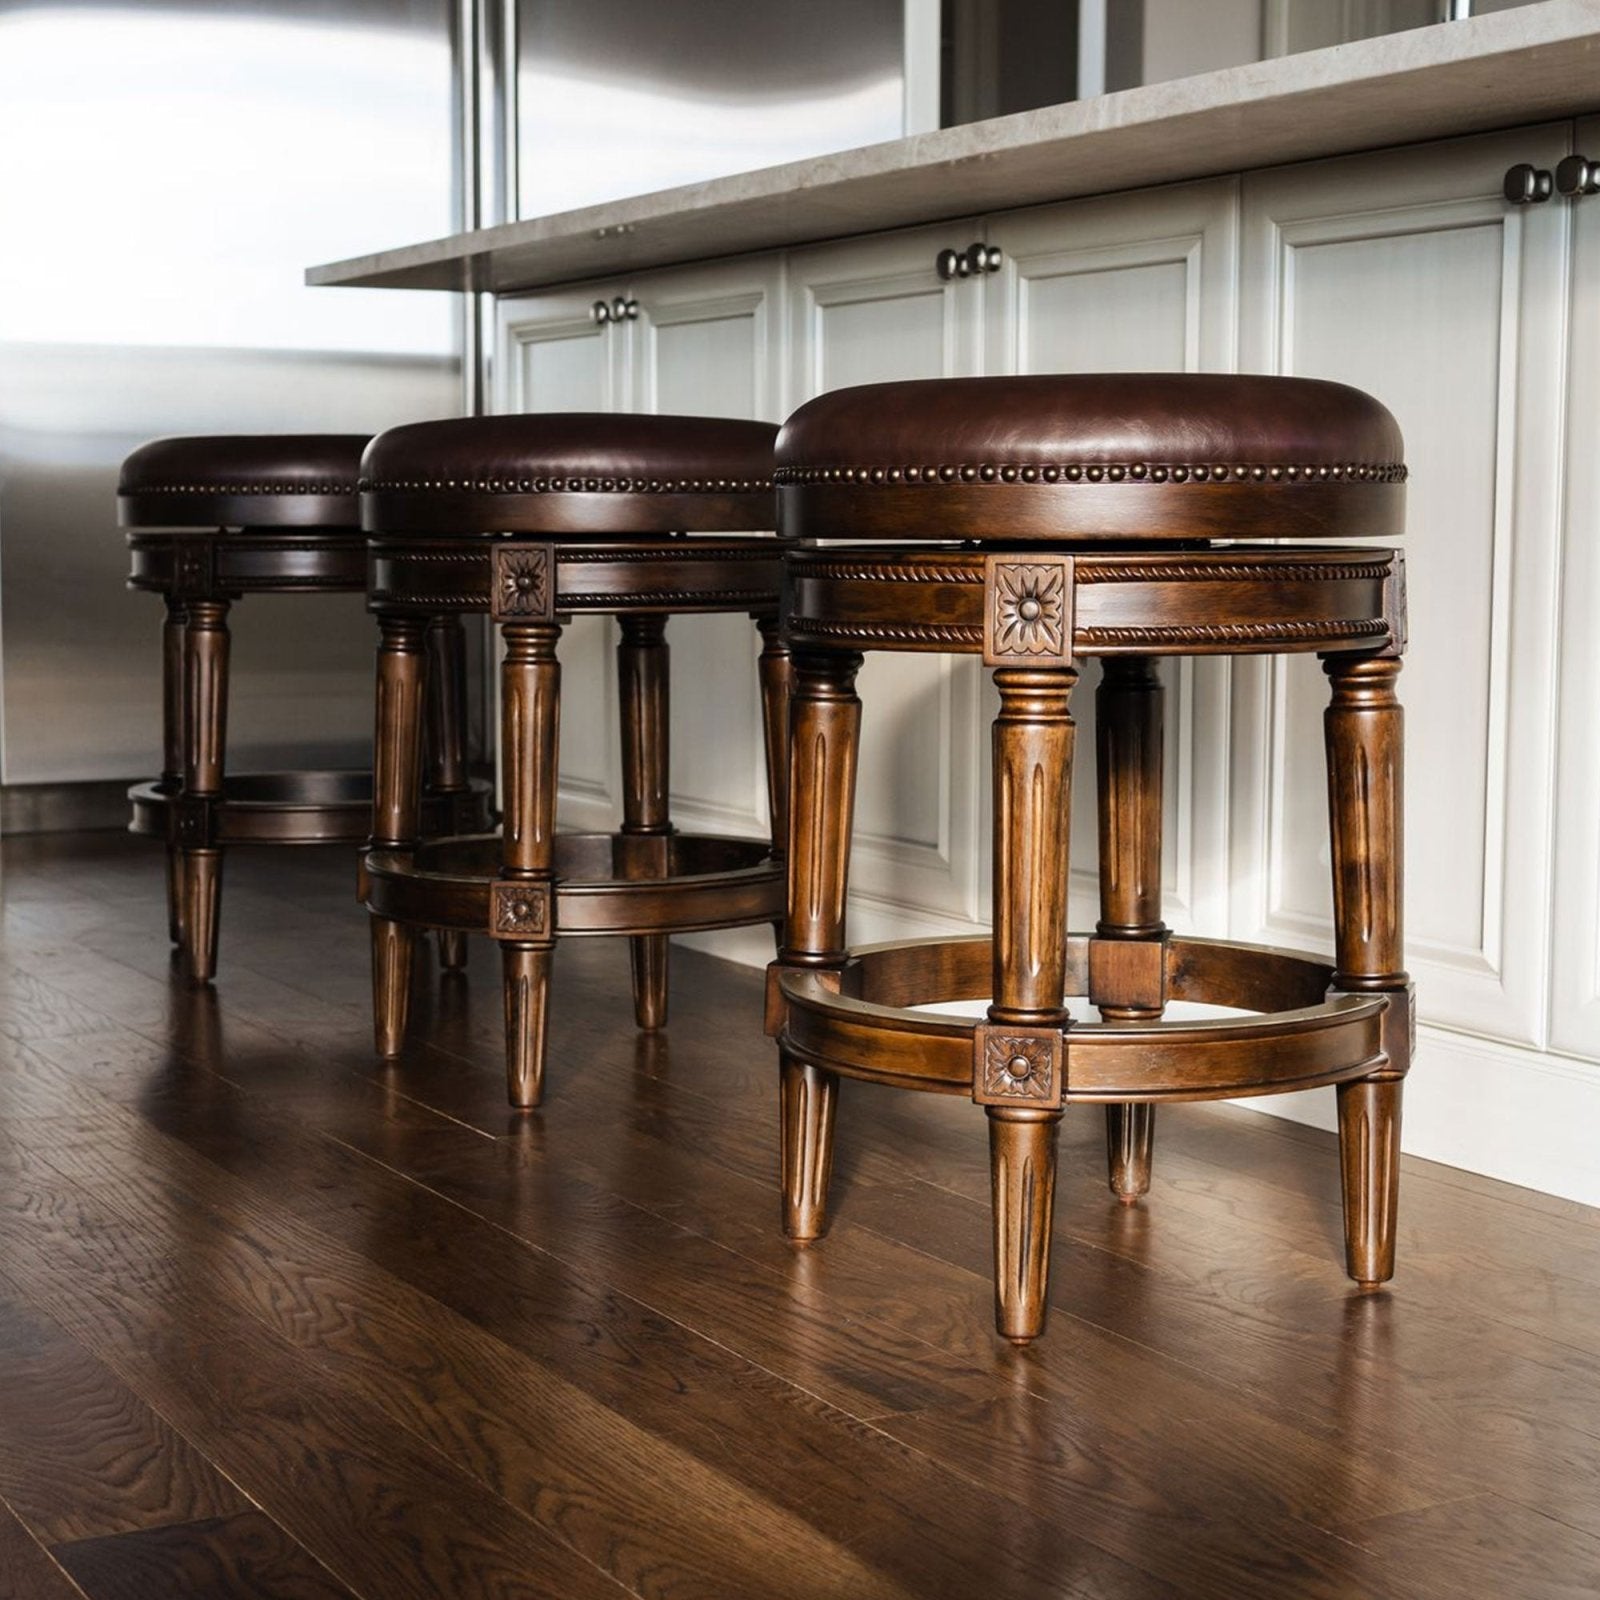 Pullman Backless Bar Stool in Dark Walnut Finish with Vintage Brown Vegan Leather in Stools by Maven Lane